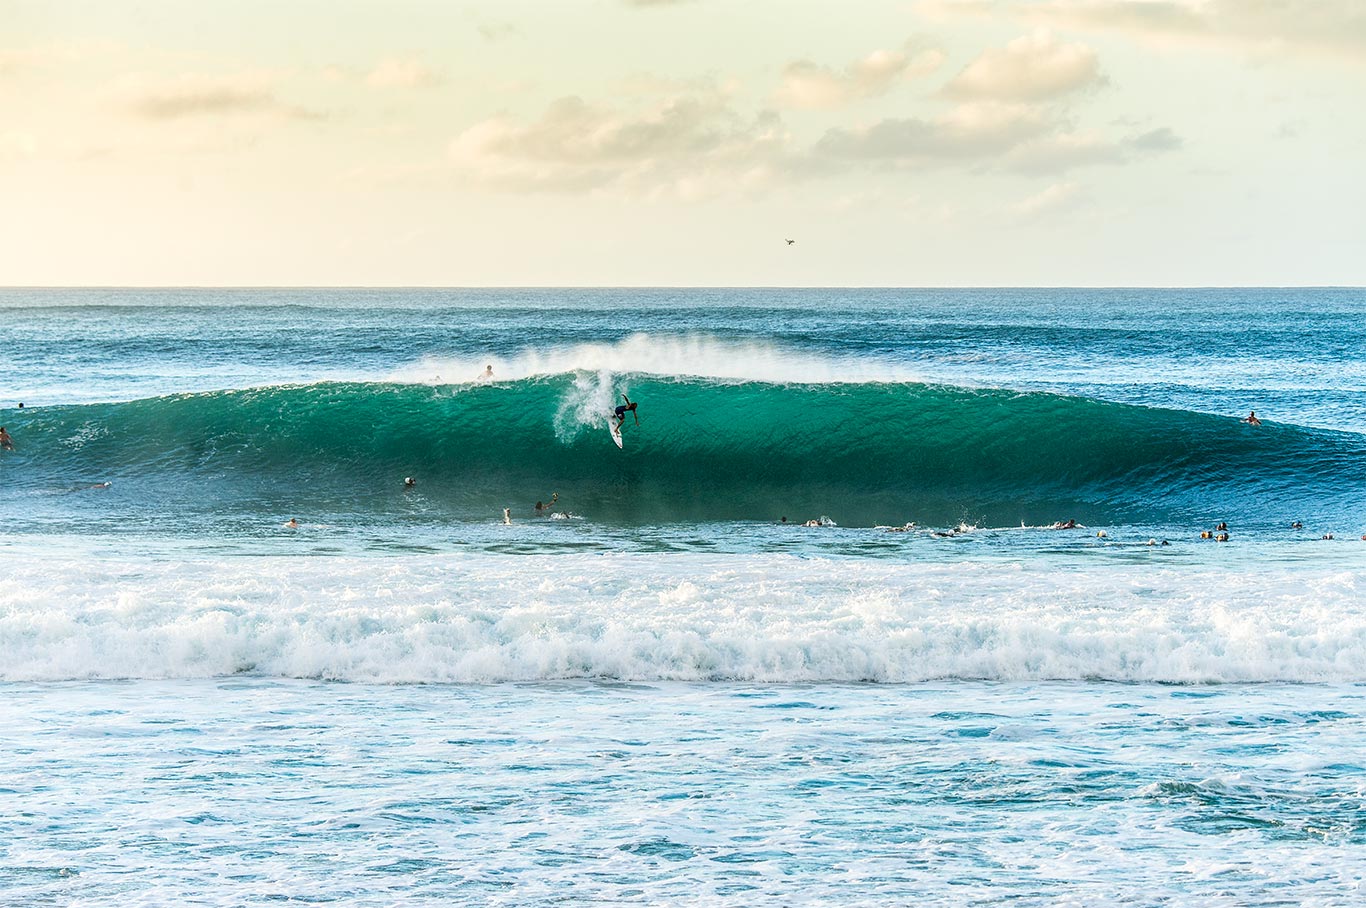 Owen Wright taking the drop at Pipeline in contest surrounded by photographers